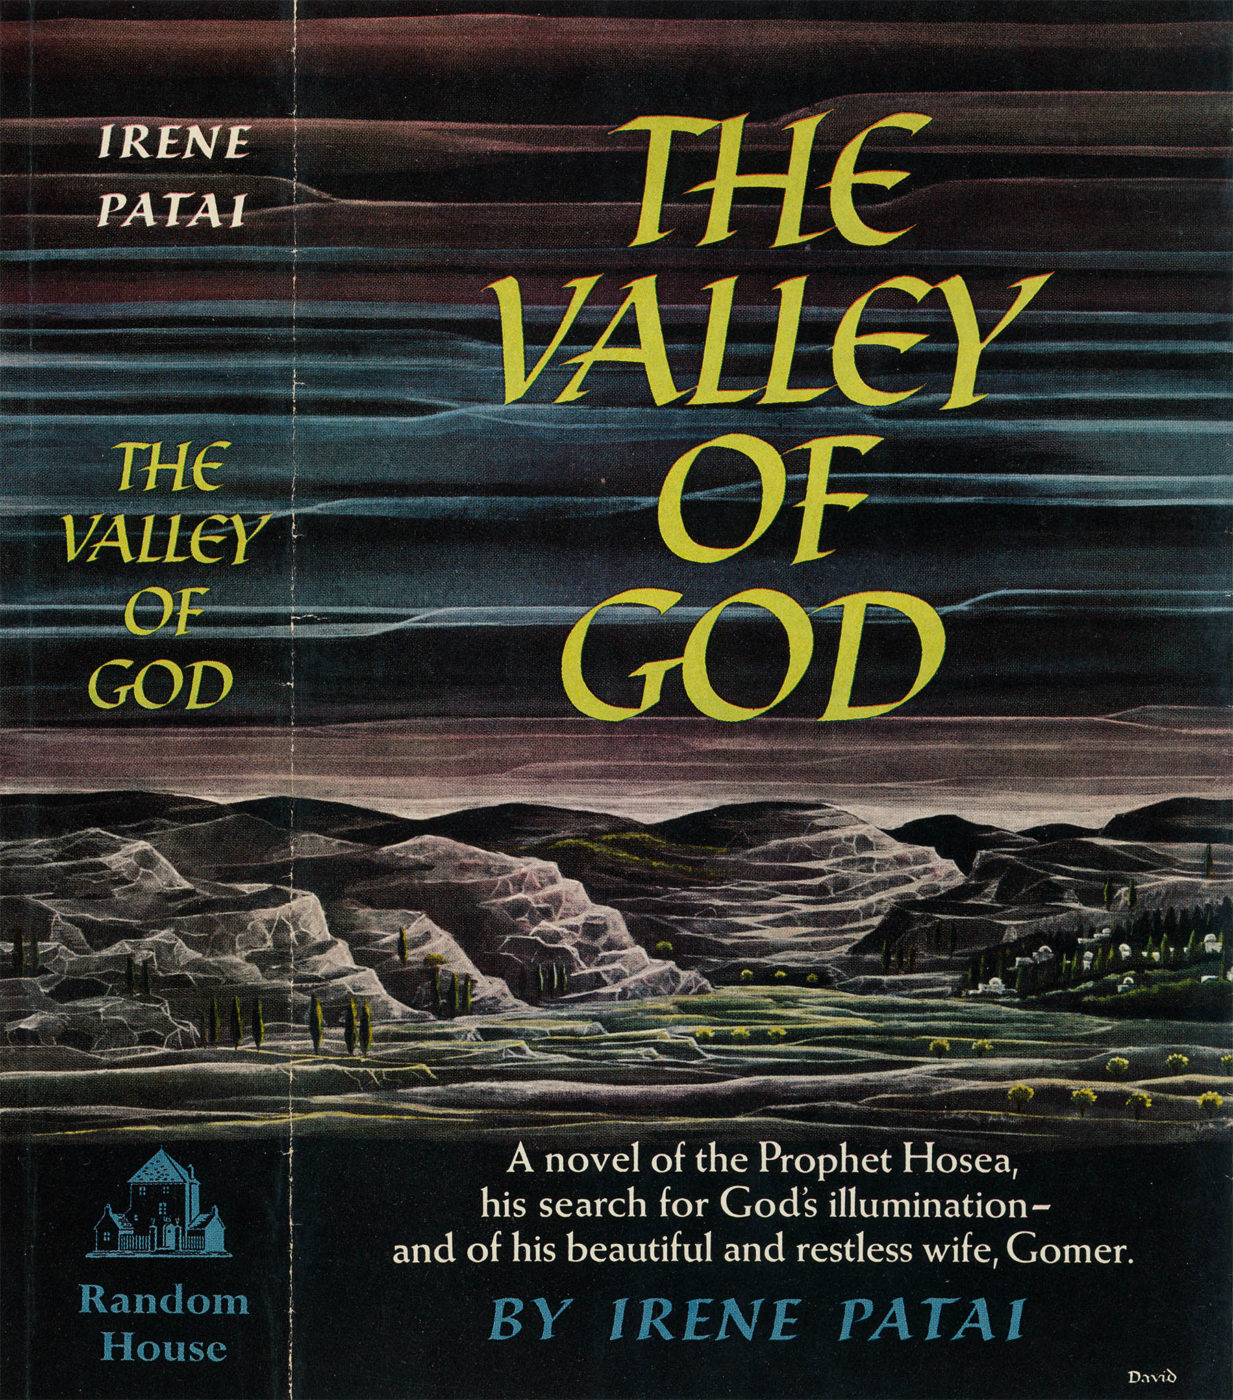 Book jacket of The Valley of God